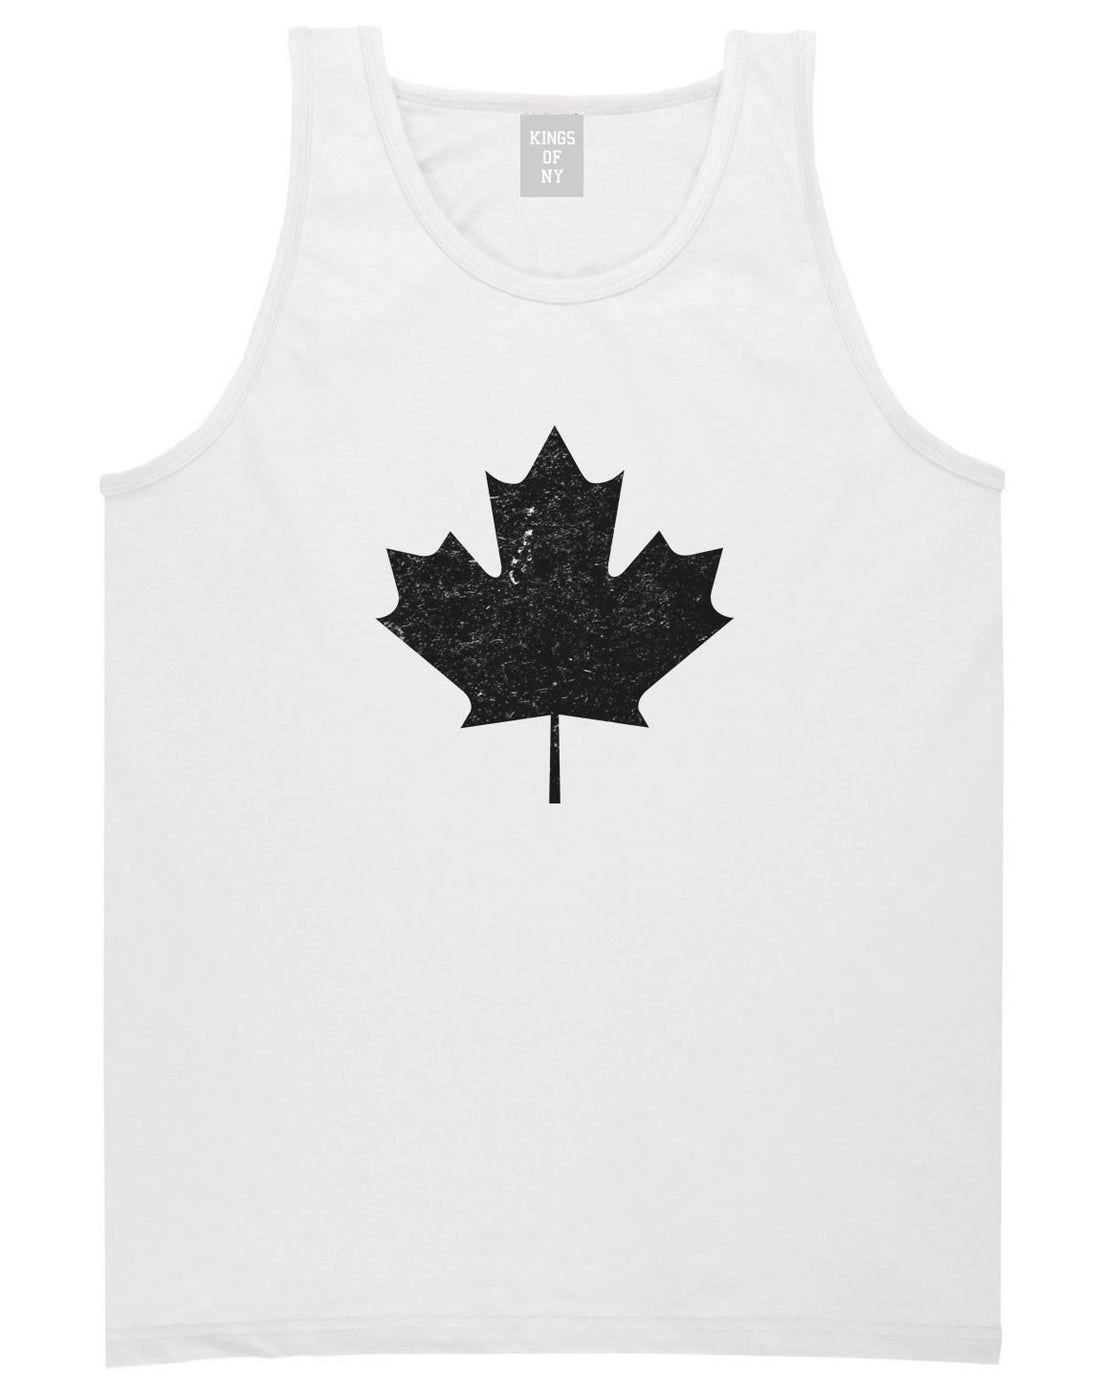 Maple Leaf Tank Top by Kings Of NY